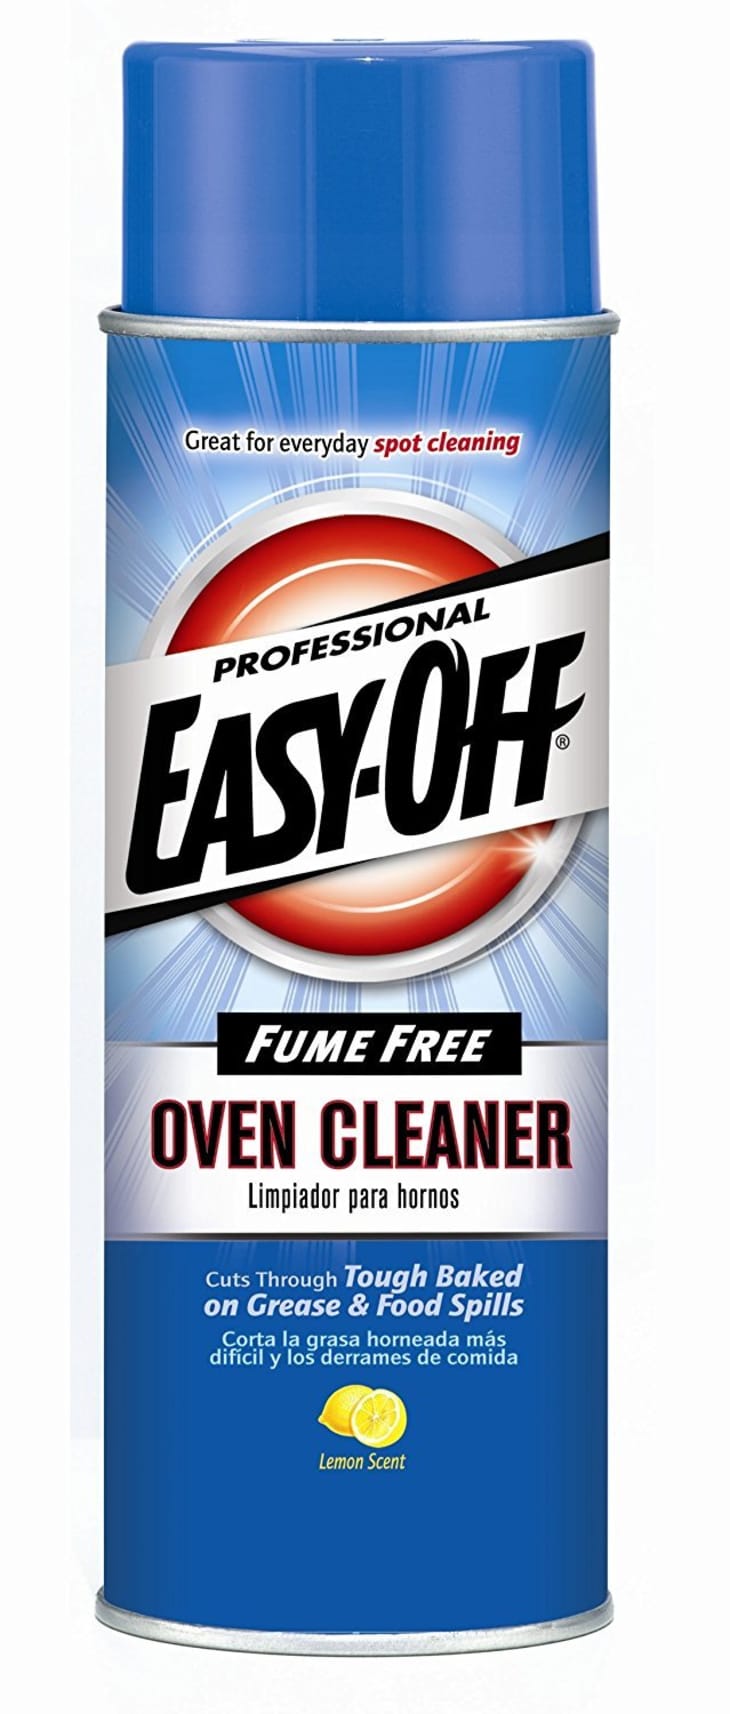 Easy-Off Professional Fume Free Max Oven Cleaner at Amazon